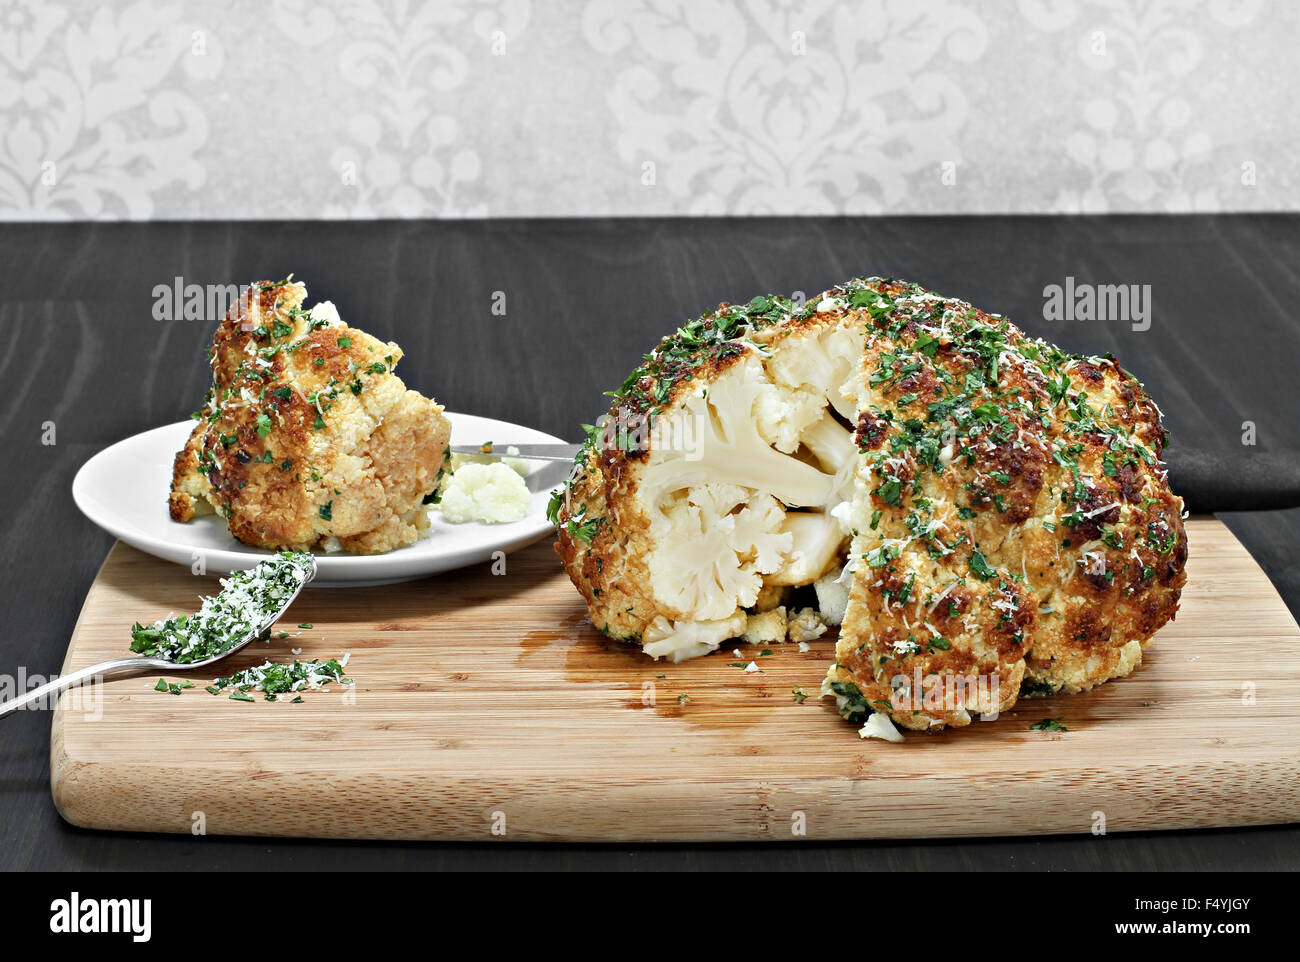 One whole roasted cauliflower head with a slice removed revealing inside appearance. Stock Photo